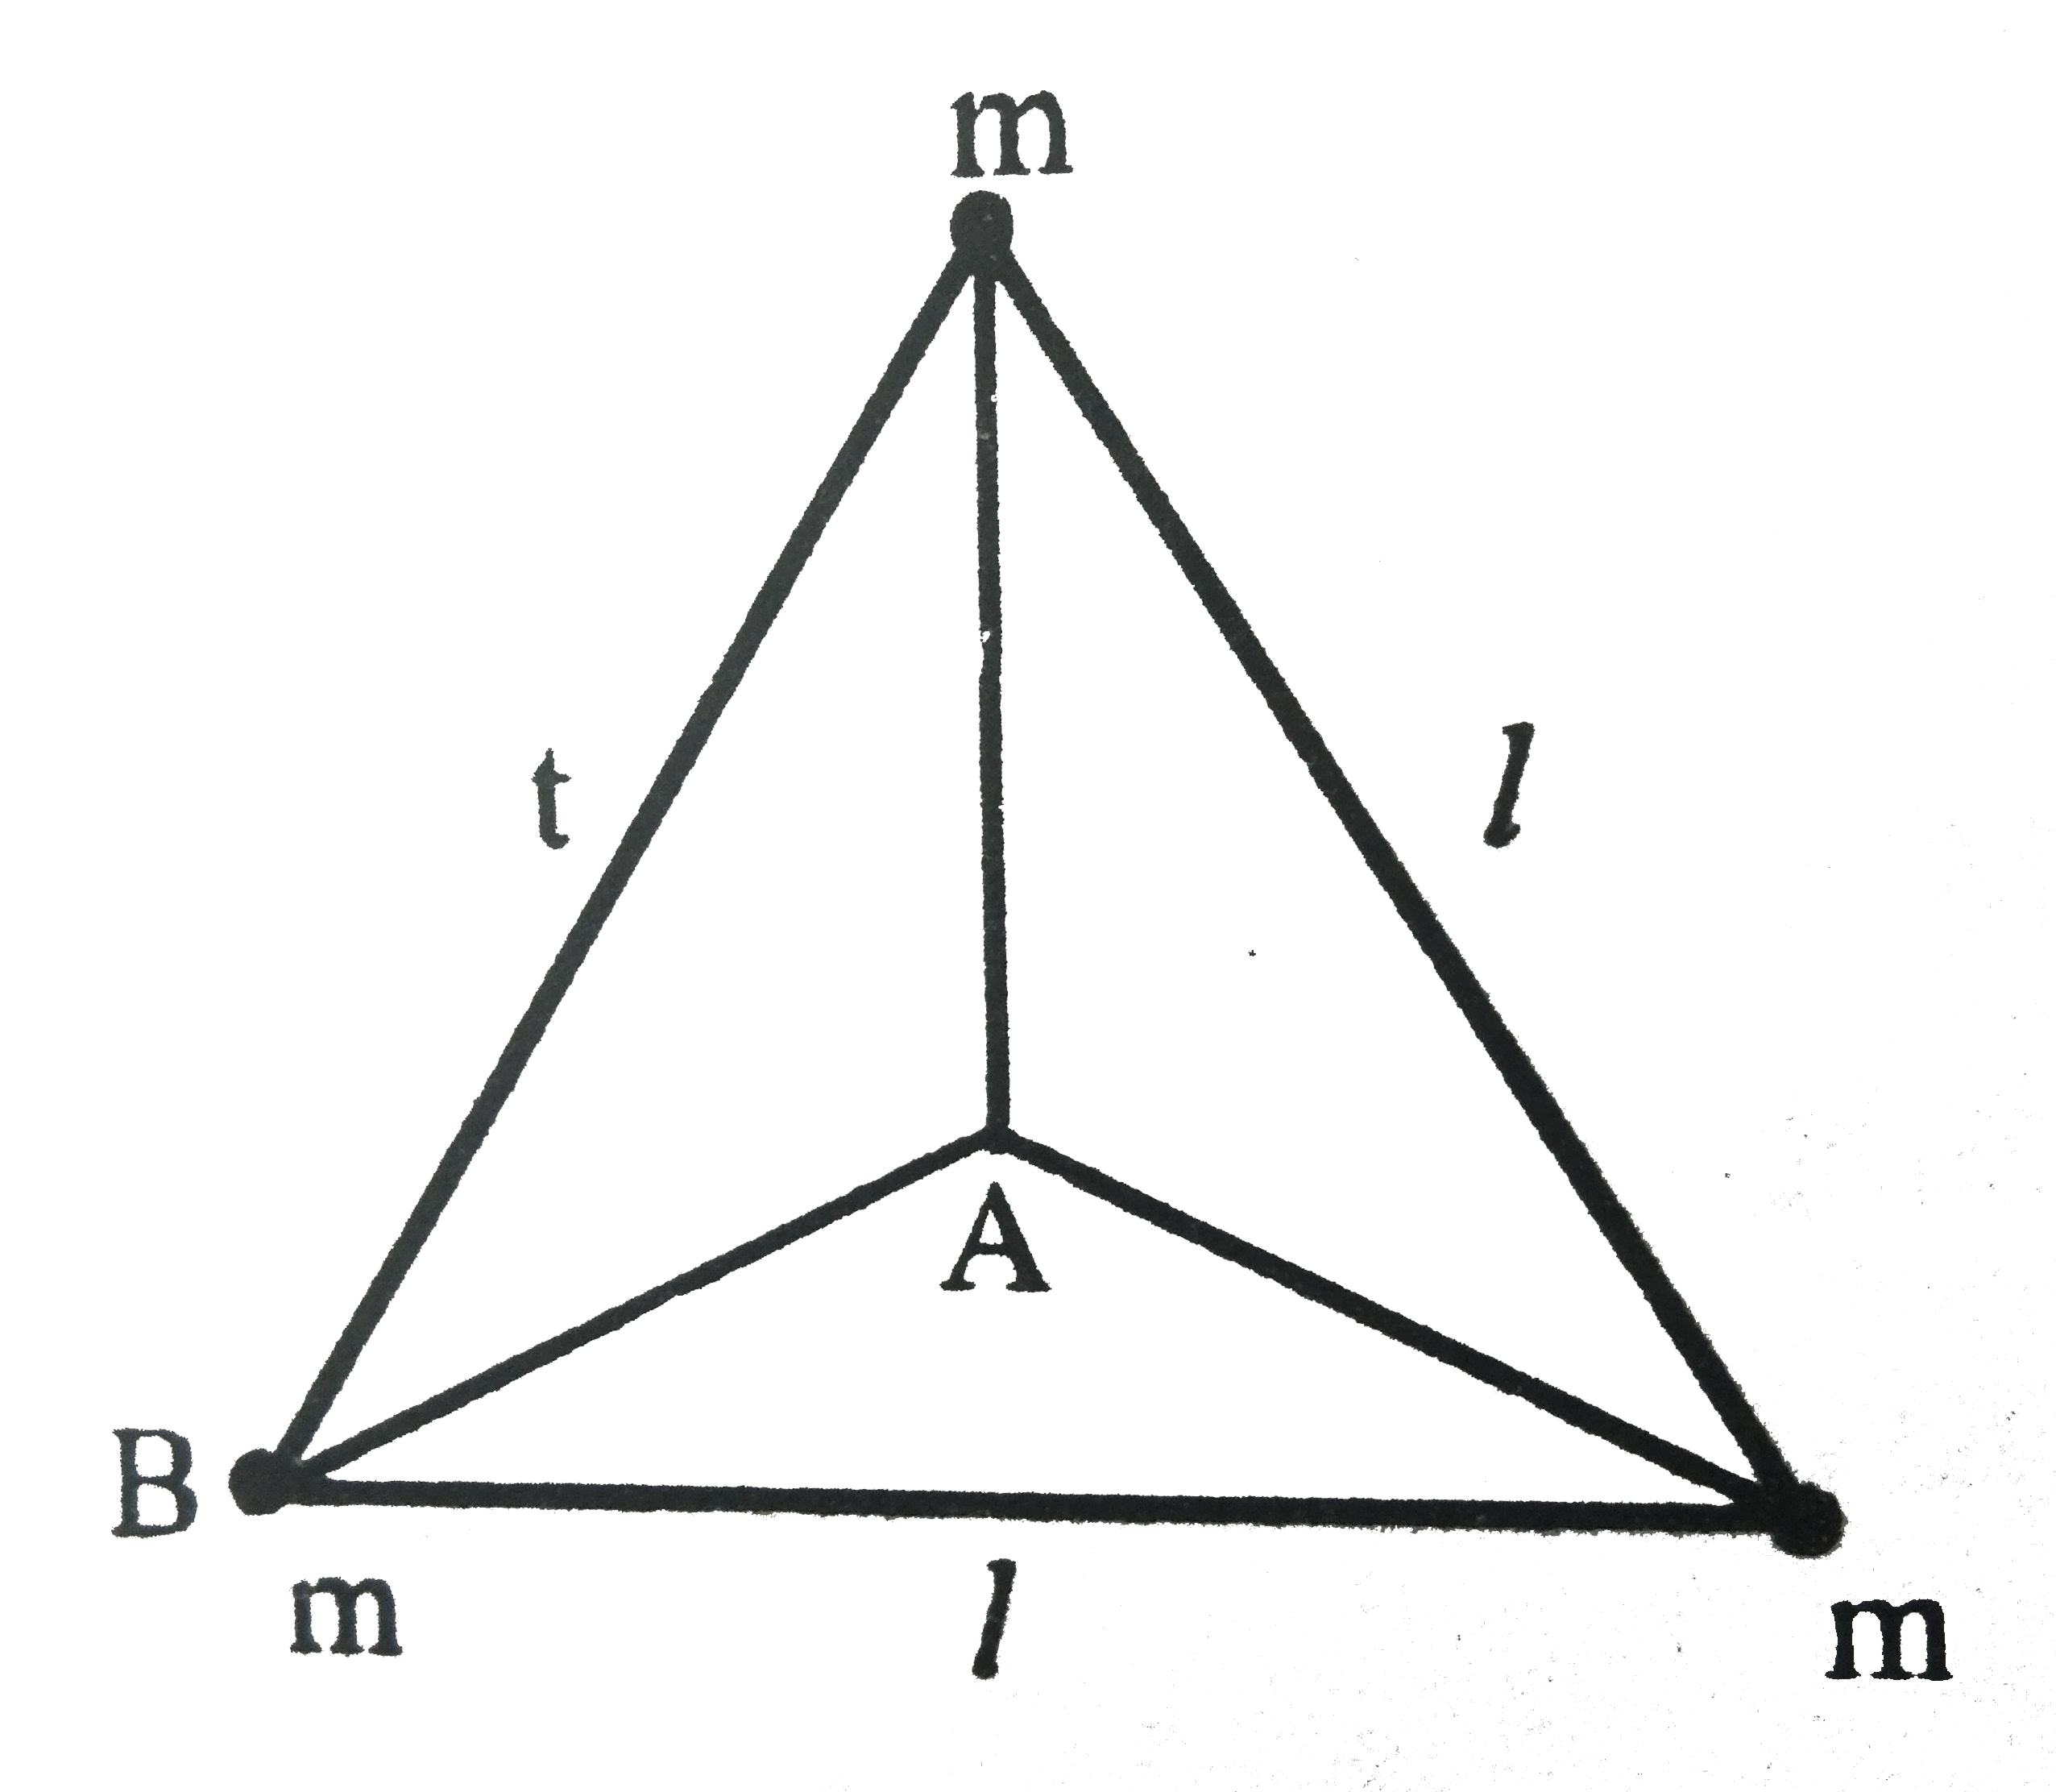 Three equal masses m are rigidly connected to each other by massless rods of length l forming and equilateral triangle, as shown above. The assembly is to be given an angular velocity omega about an axis perpendicular to the triangle. For fixed omega, what is the ratio of the kinetic energy of the assembly for an axis through B t compared with that for an axis through A.   .